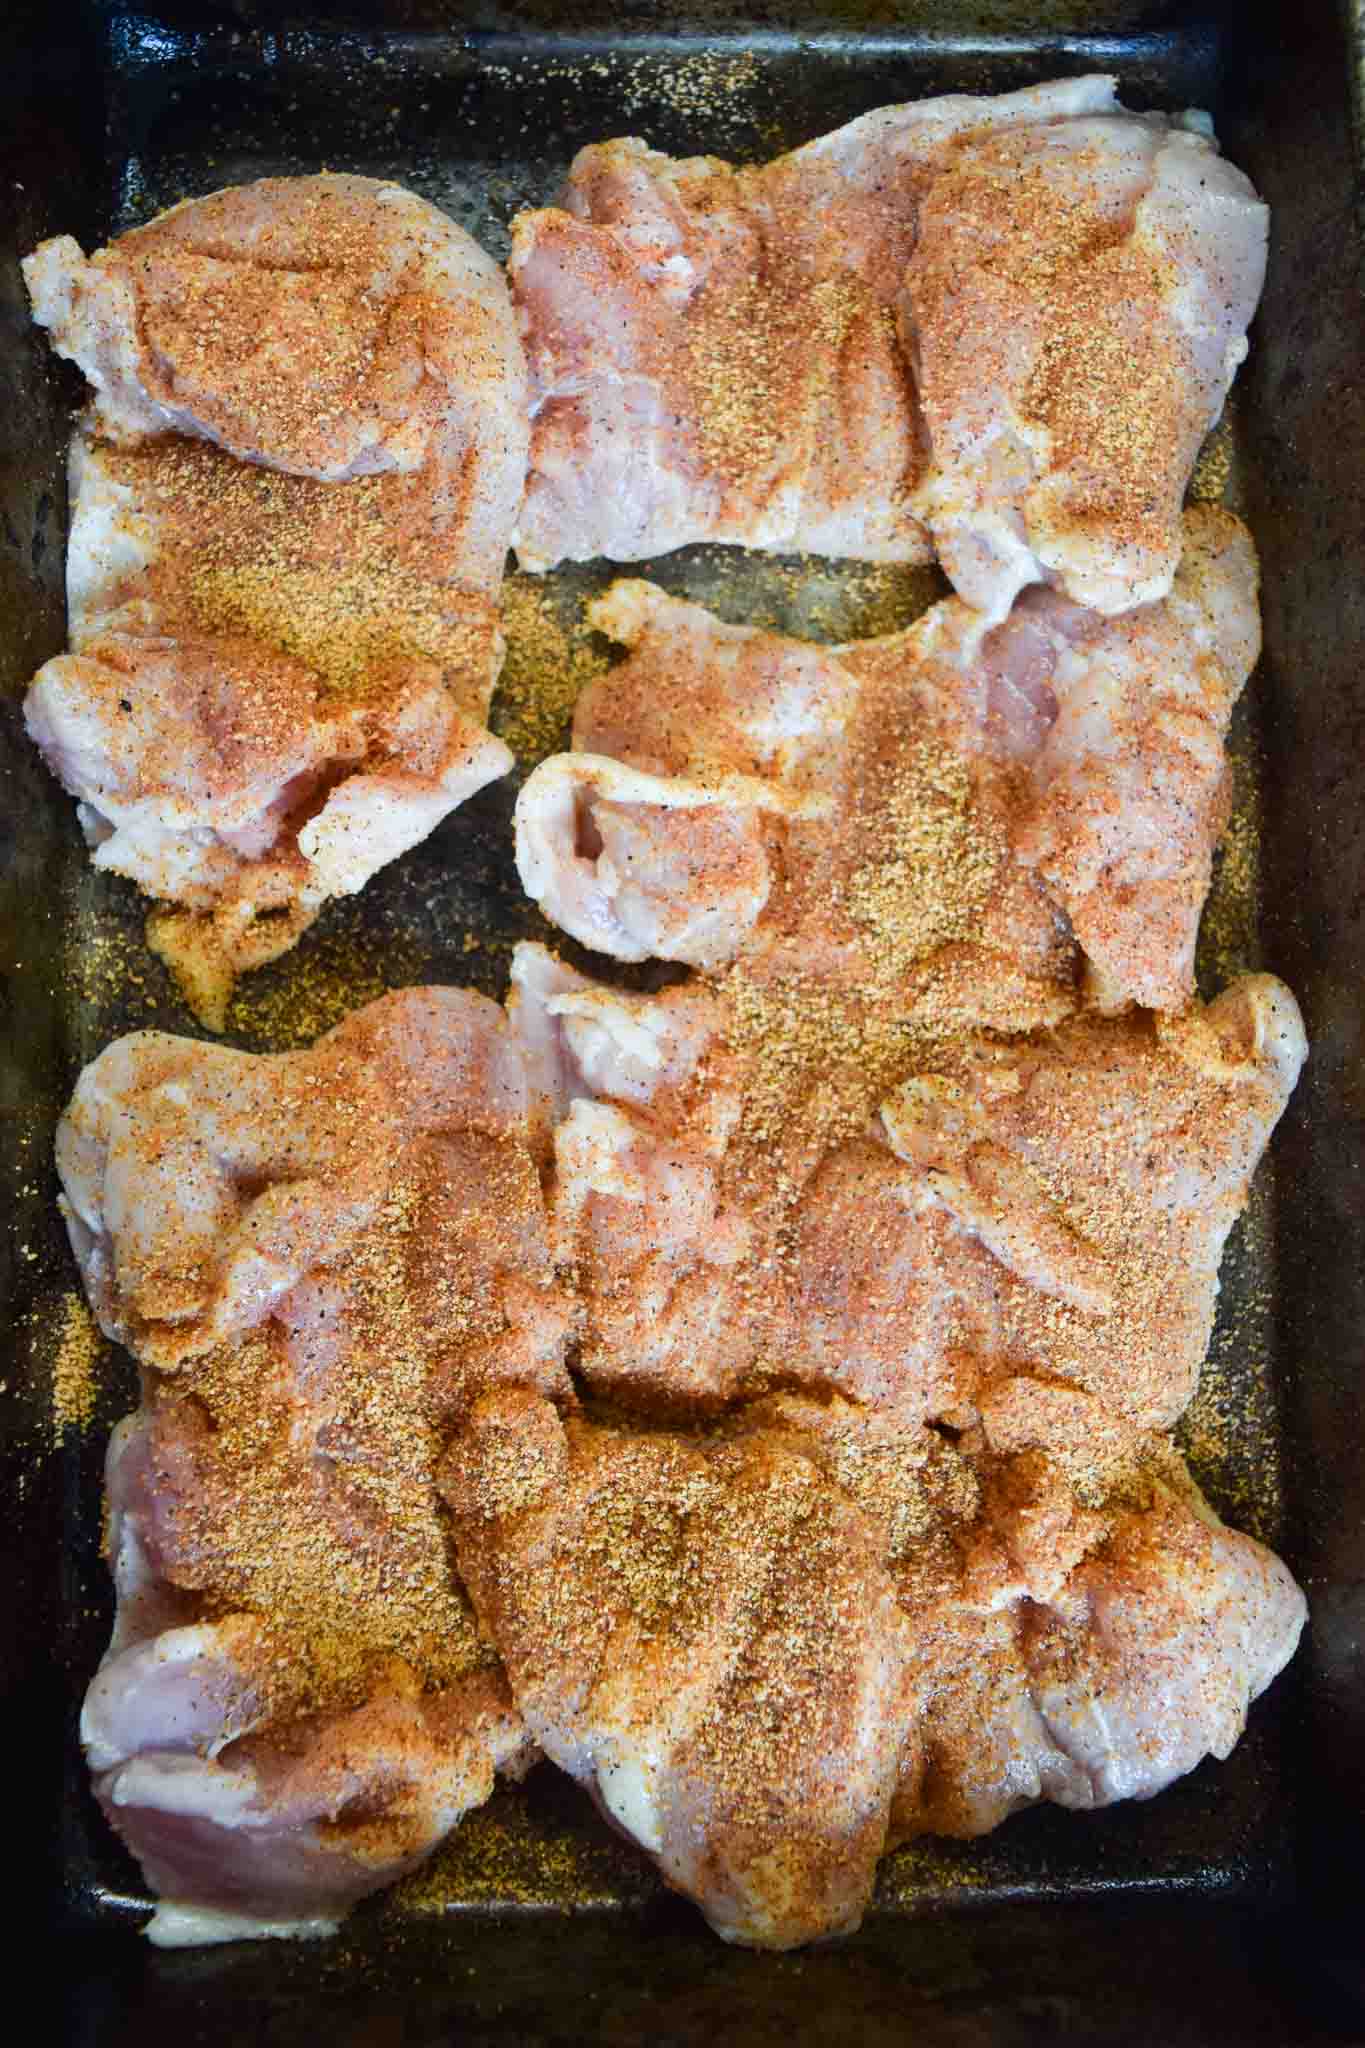 Chicken thighs on baking sheet covered in seasonings overhead shot